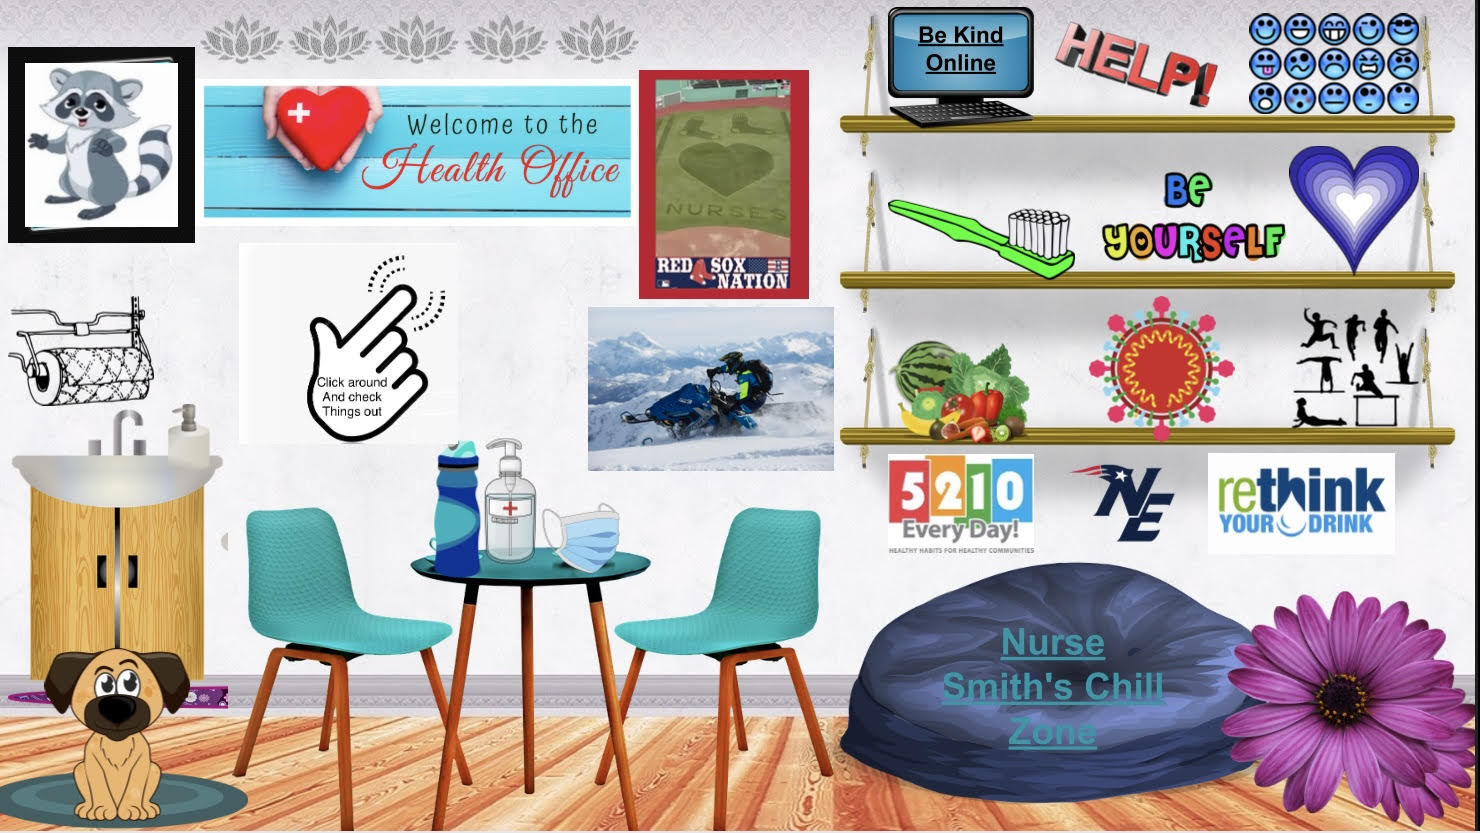 preview image of the nurse's virtual office; a digitally rendered room with table, chairs, and various symbols to click on and follow various links